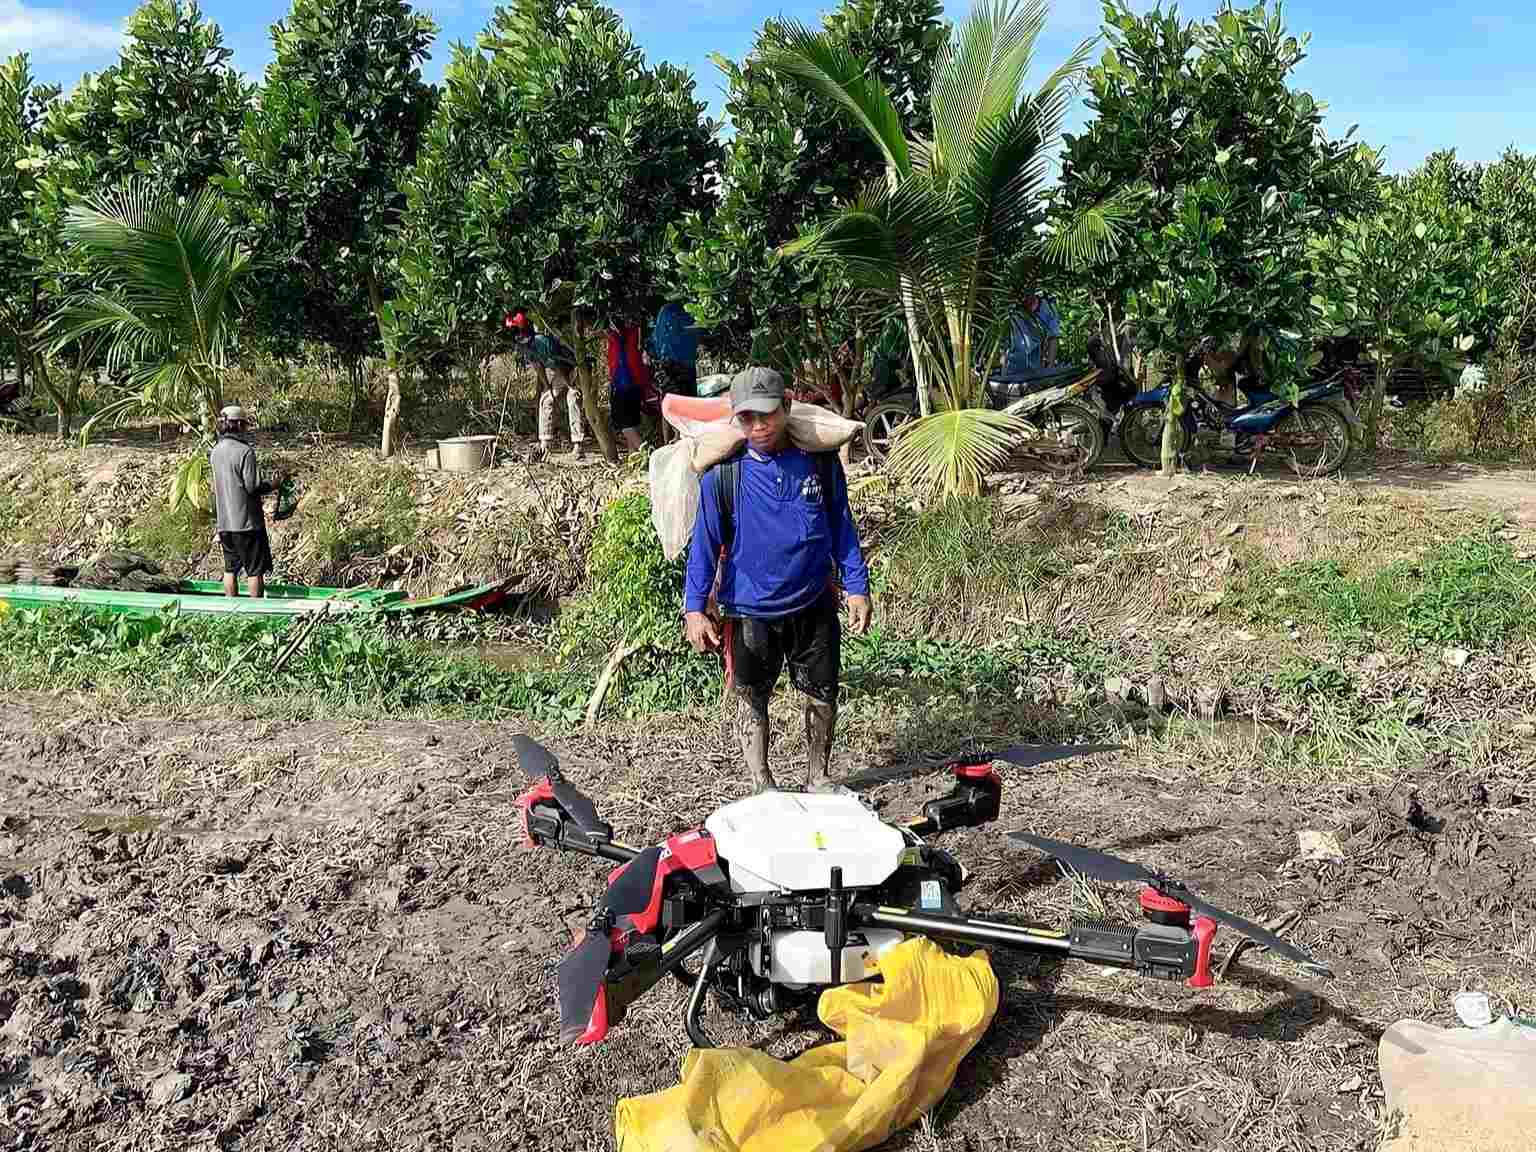 Nguyen, a farmer, is quite satisfied with the drone for seeding because of its efficiency